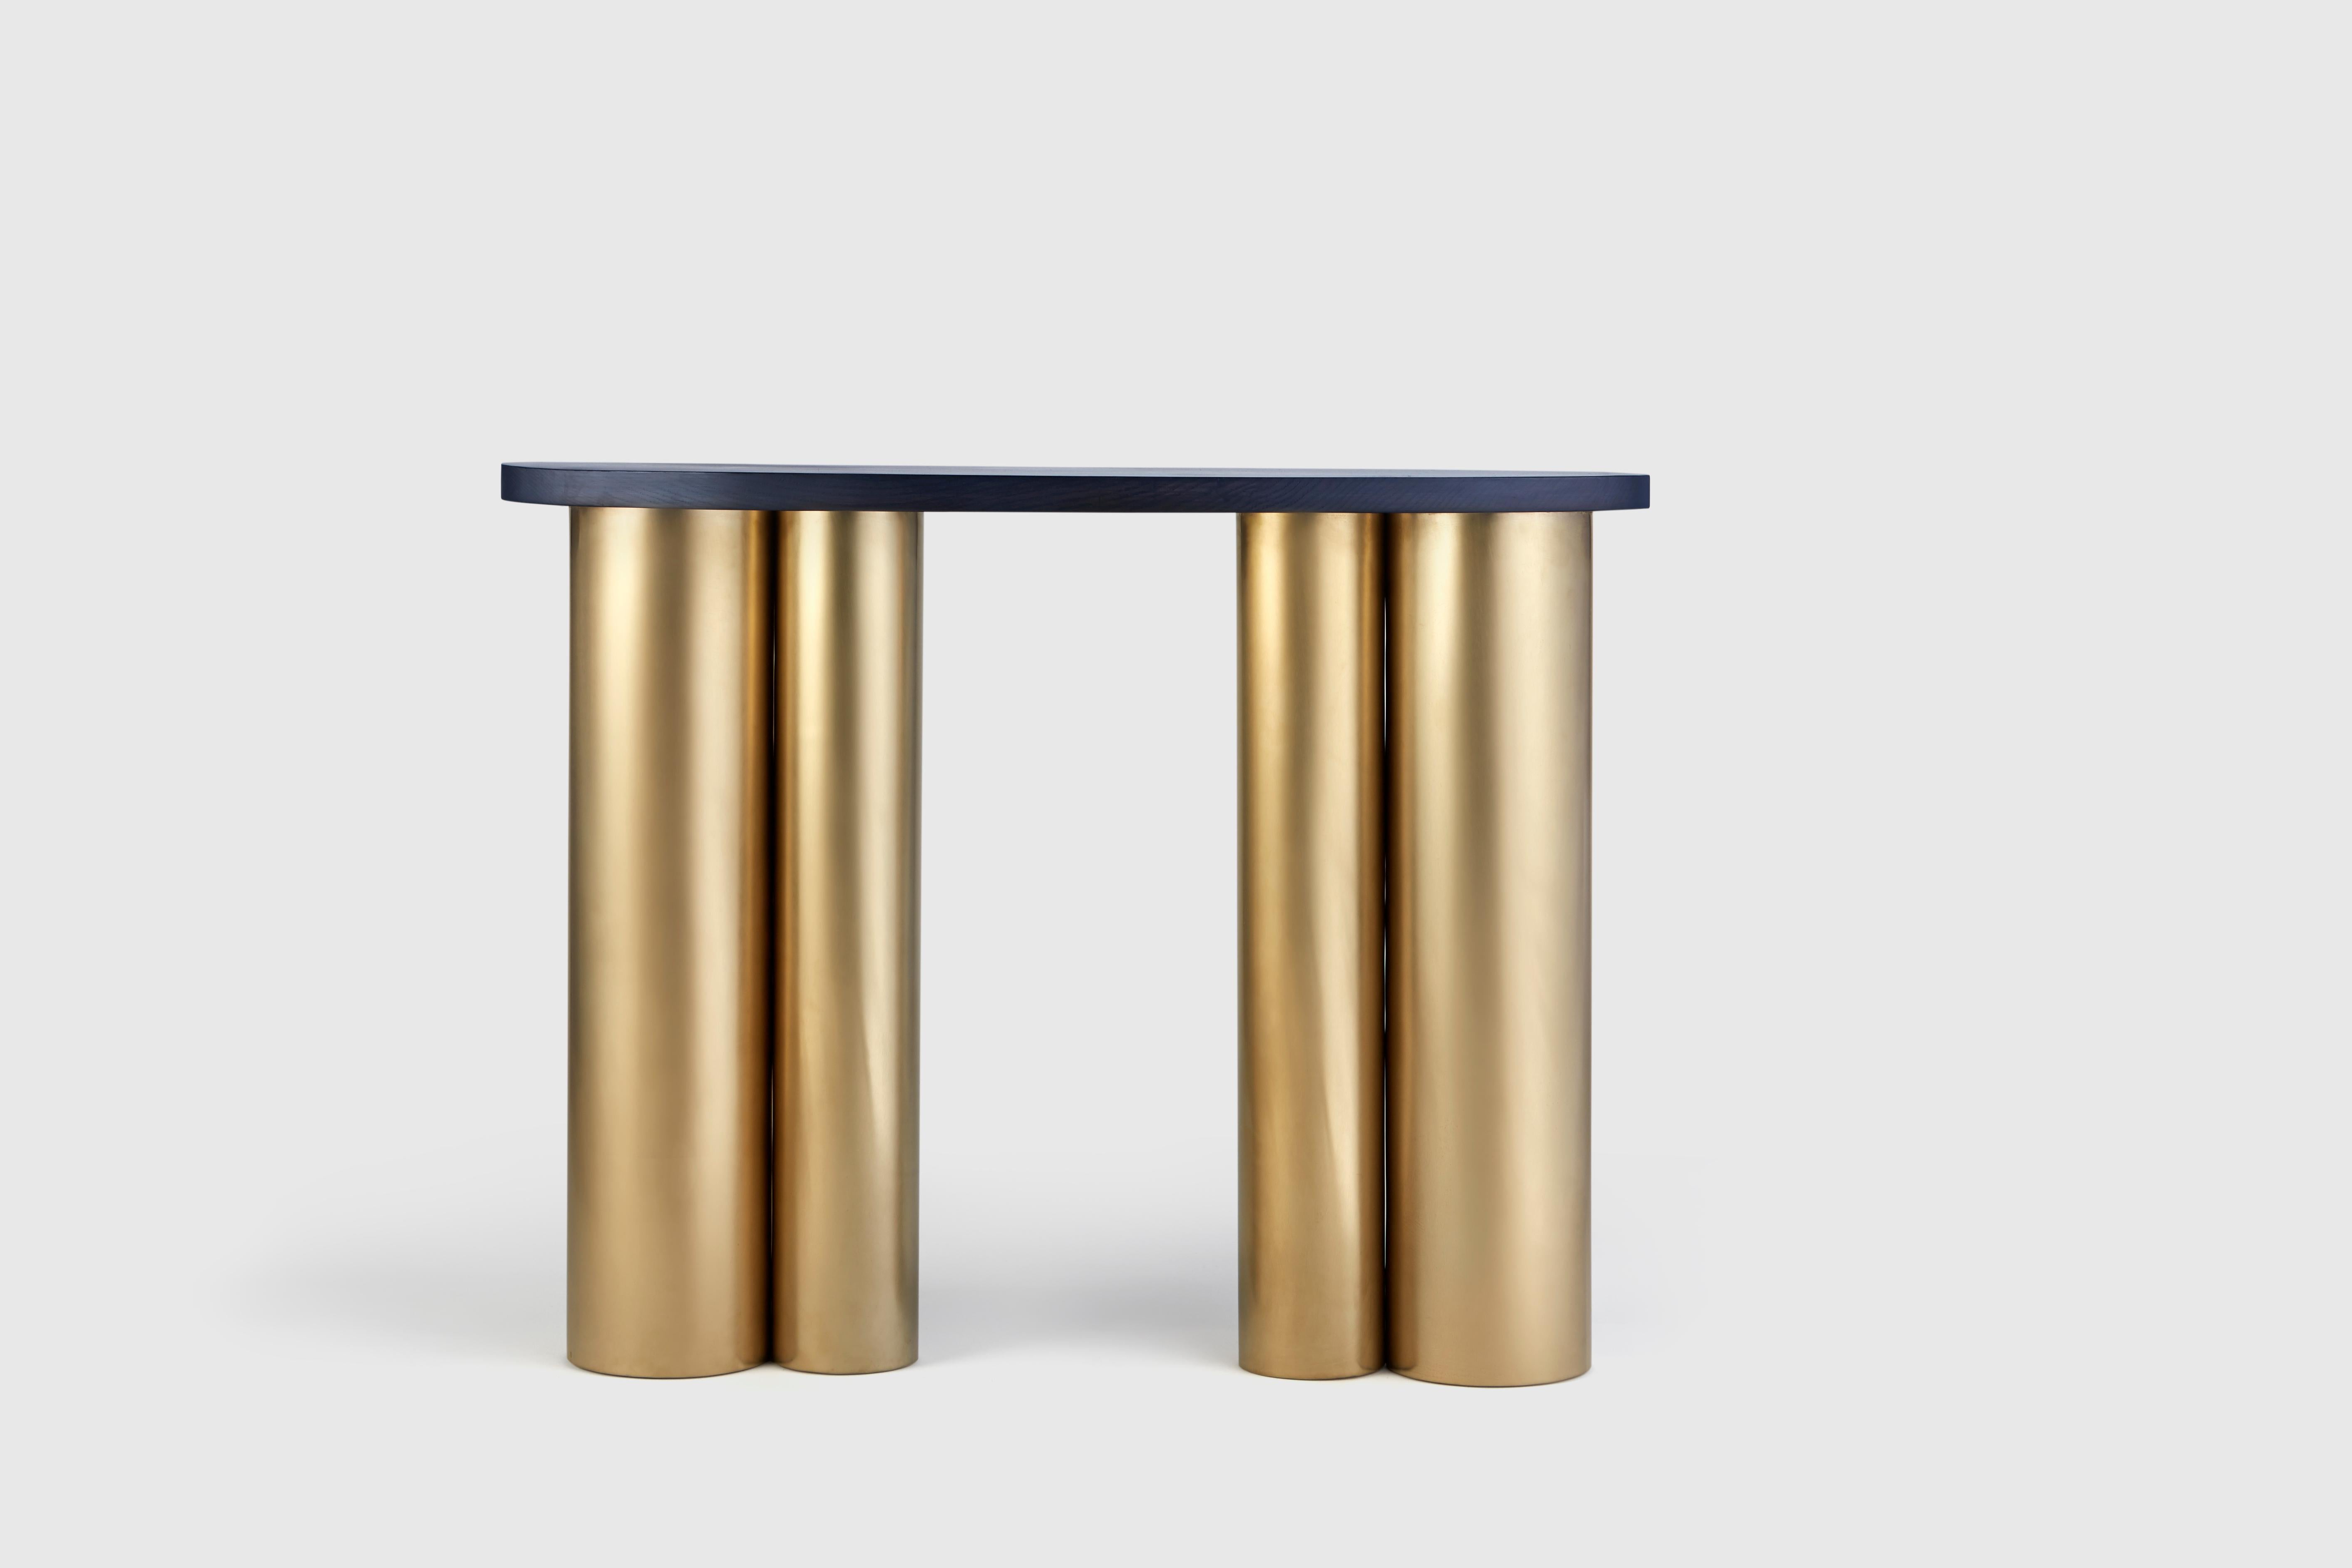 Unique bloom table gold by Hatsu
Dimensions: D 40 x W 40 x H 80 cm 
Materials: Stained solid wood on eloctroplated steel body

Hatsu is a design studio based in Mumbai that creates modern lighting that are unique and immediately recognisable. We